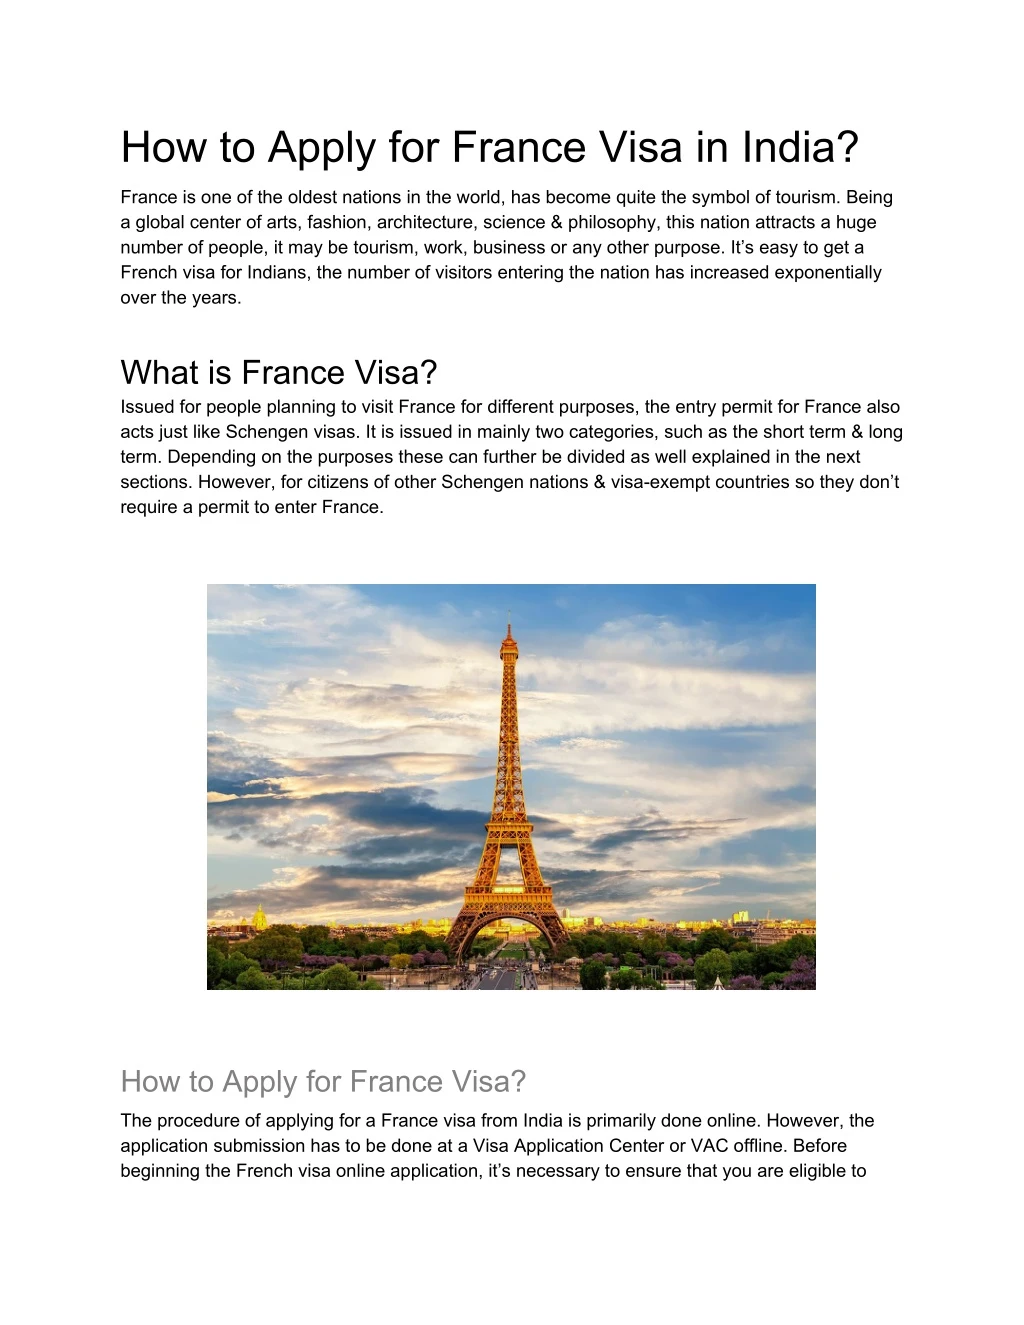 how to apply for france visa in india